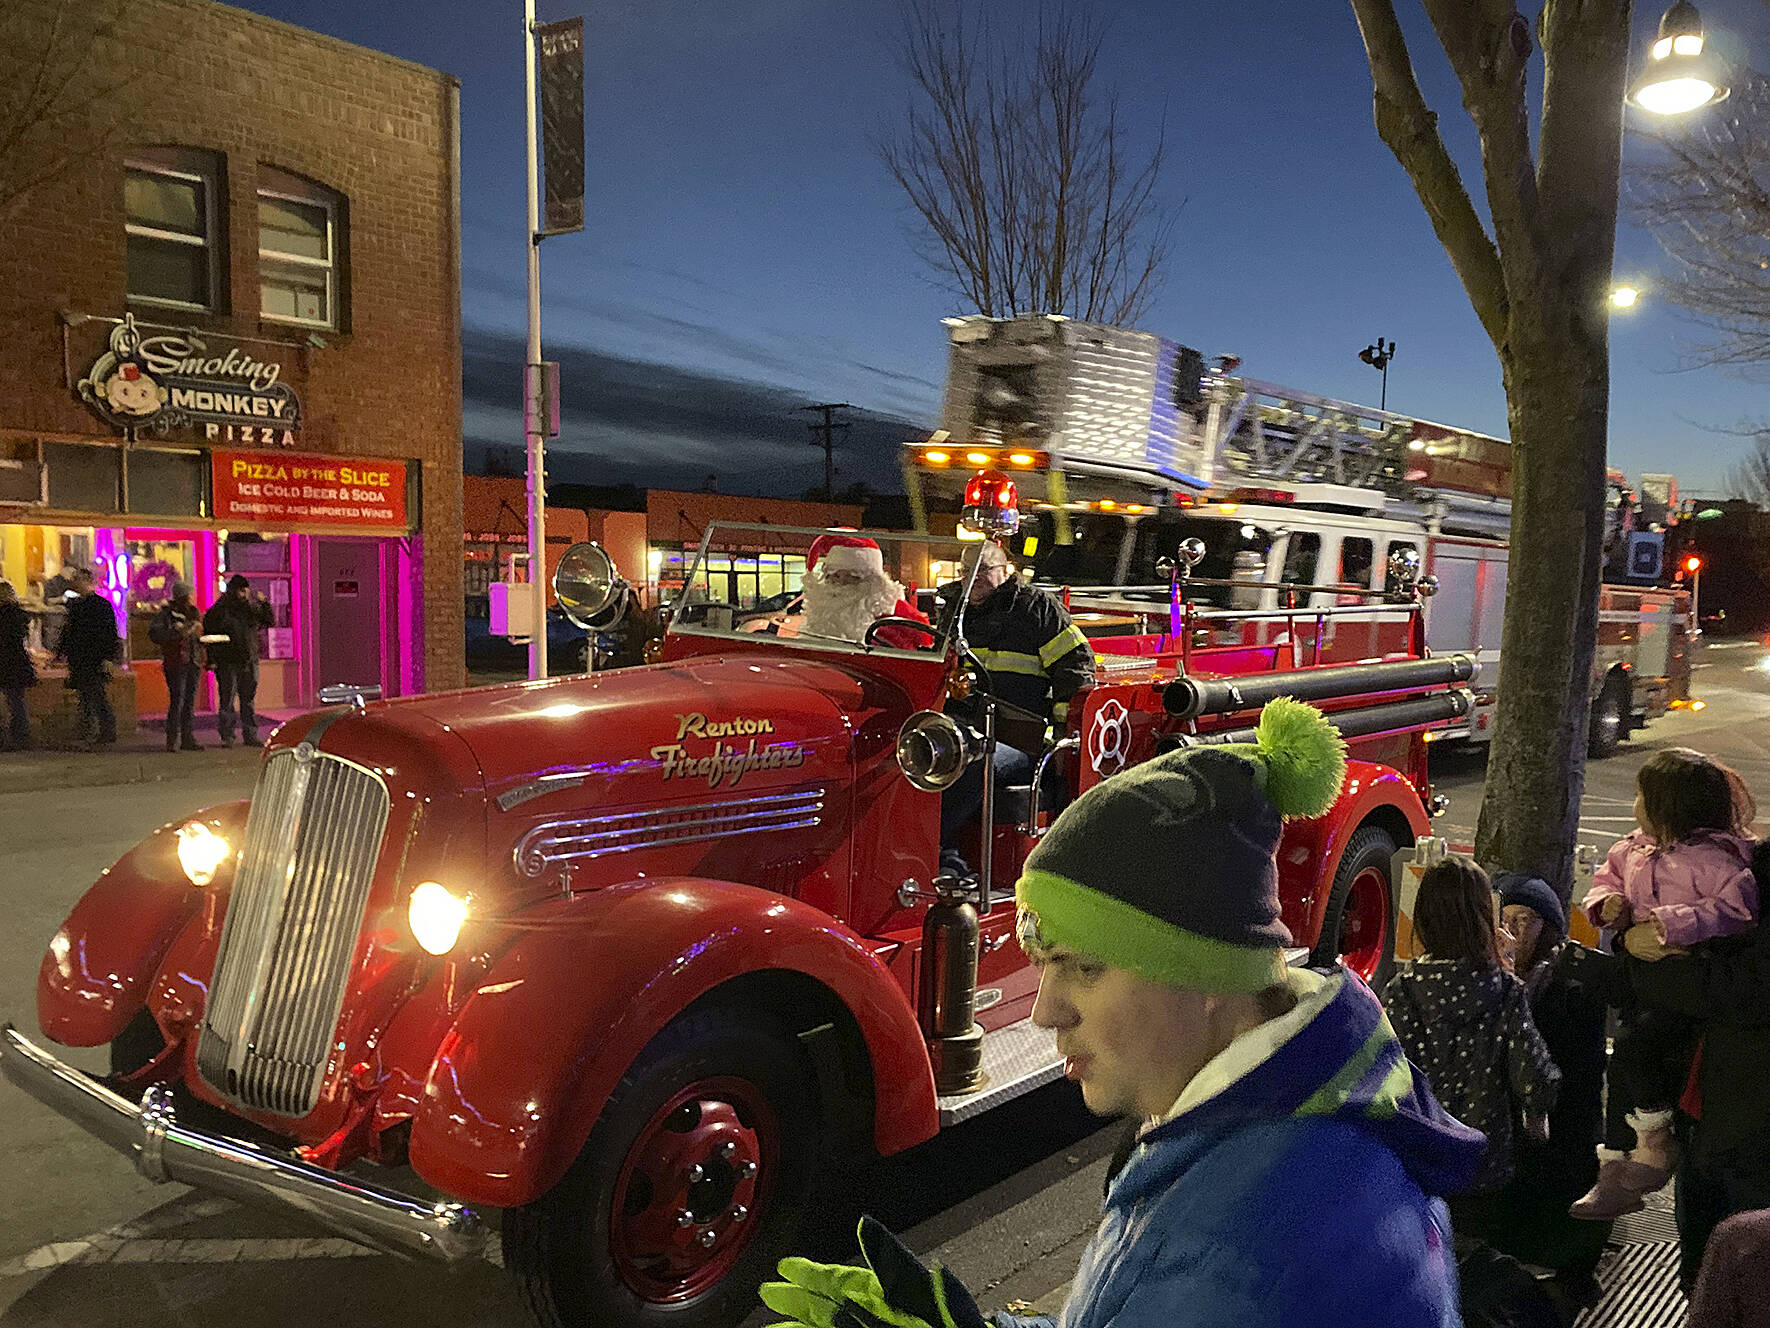 After the tree lighting, Santa Claus rolled up with his friends at Renton Regional Fire Authority, Saturday, Nov. 30, 2019, at Piazza Park. File photo